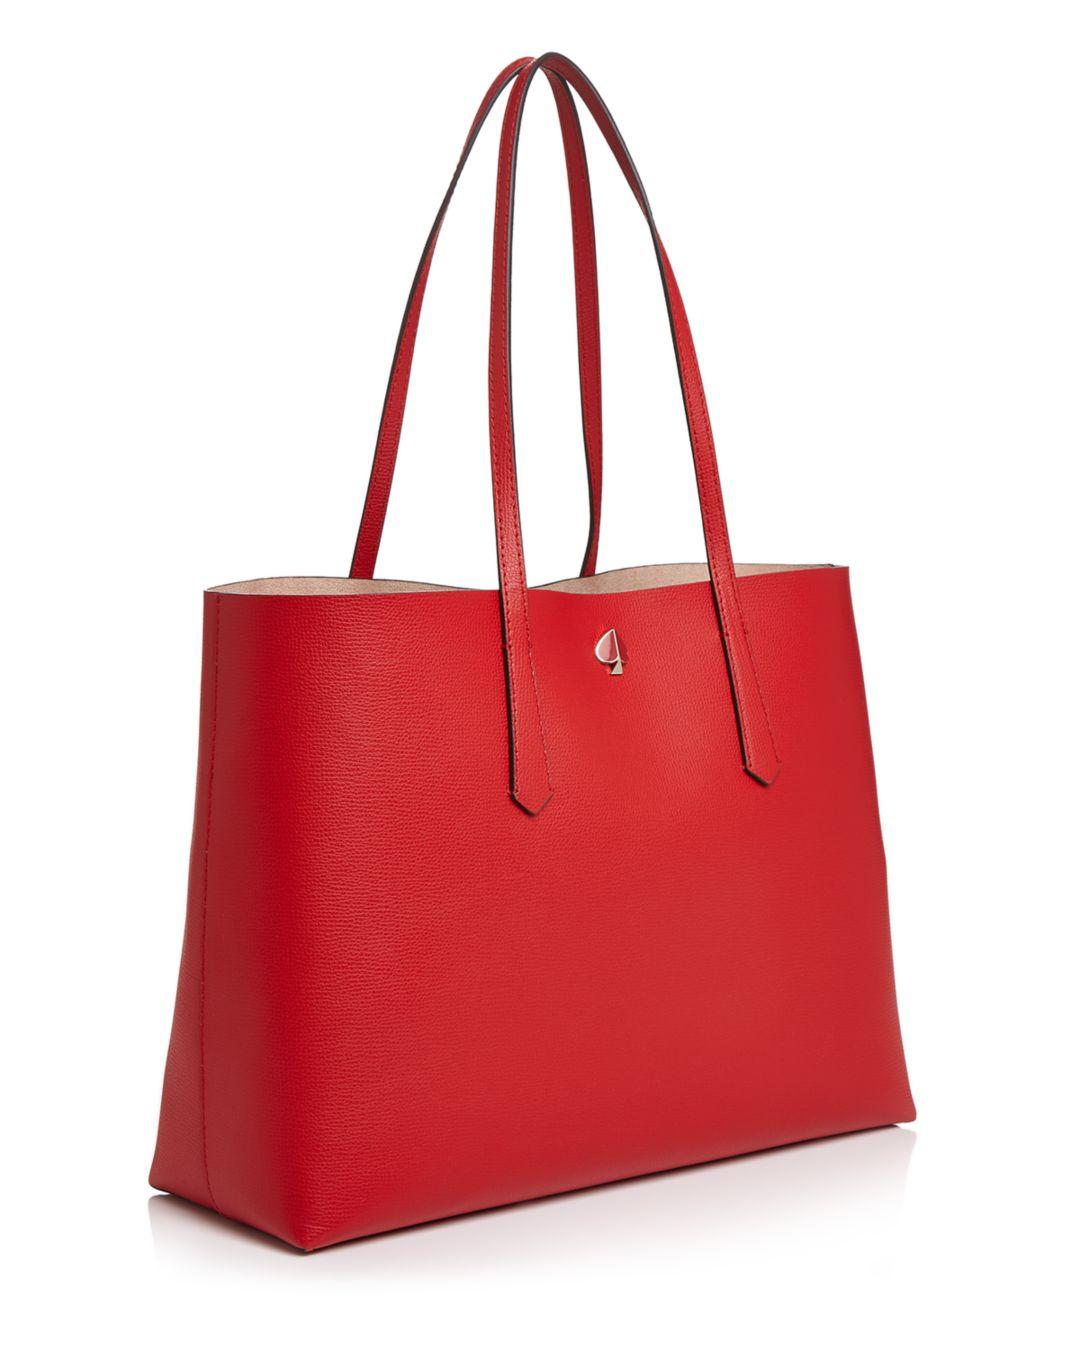 Kate Spade Large Leather Tote Bag in Red - Lyst